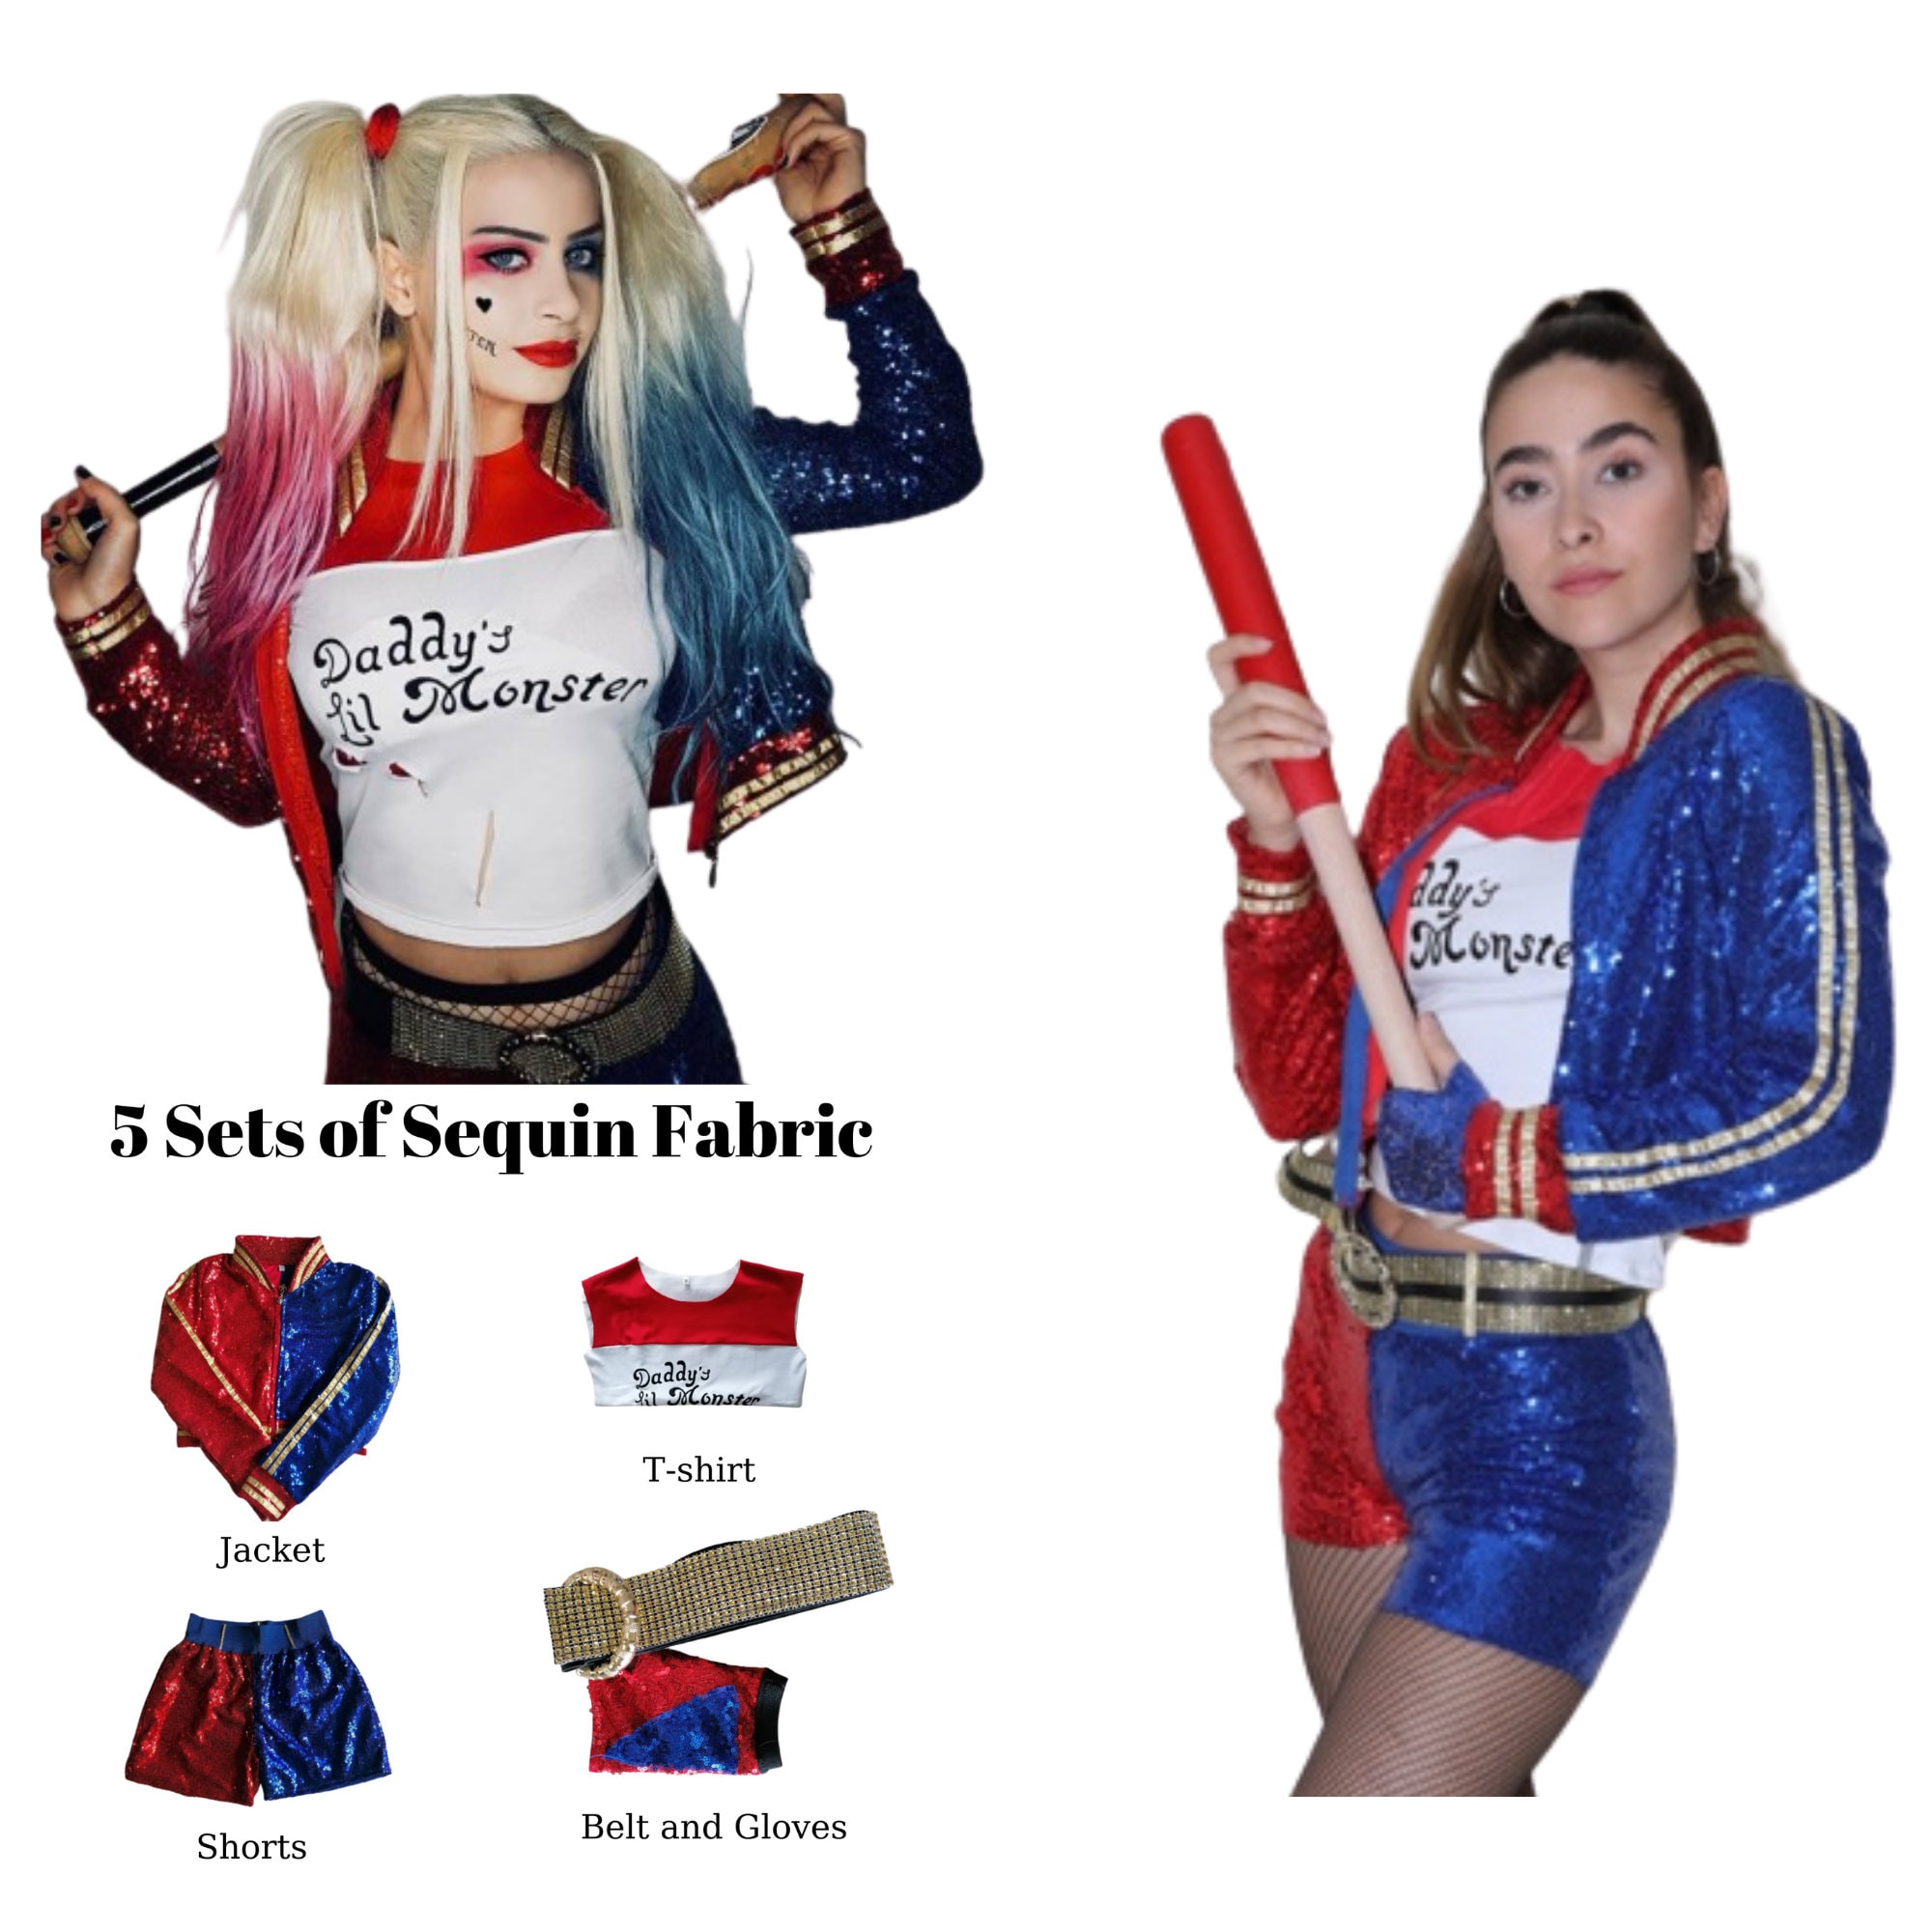 Harley Quinn Costume for Adults, Harley Quinn Jacket, DC Comics, Hallowen  Costumes, Girls Harley Quinn Costume Cosplay, Sequin Fabric 